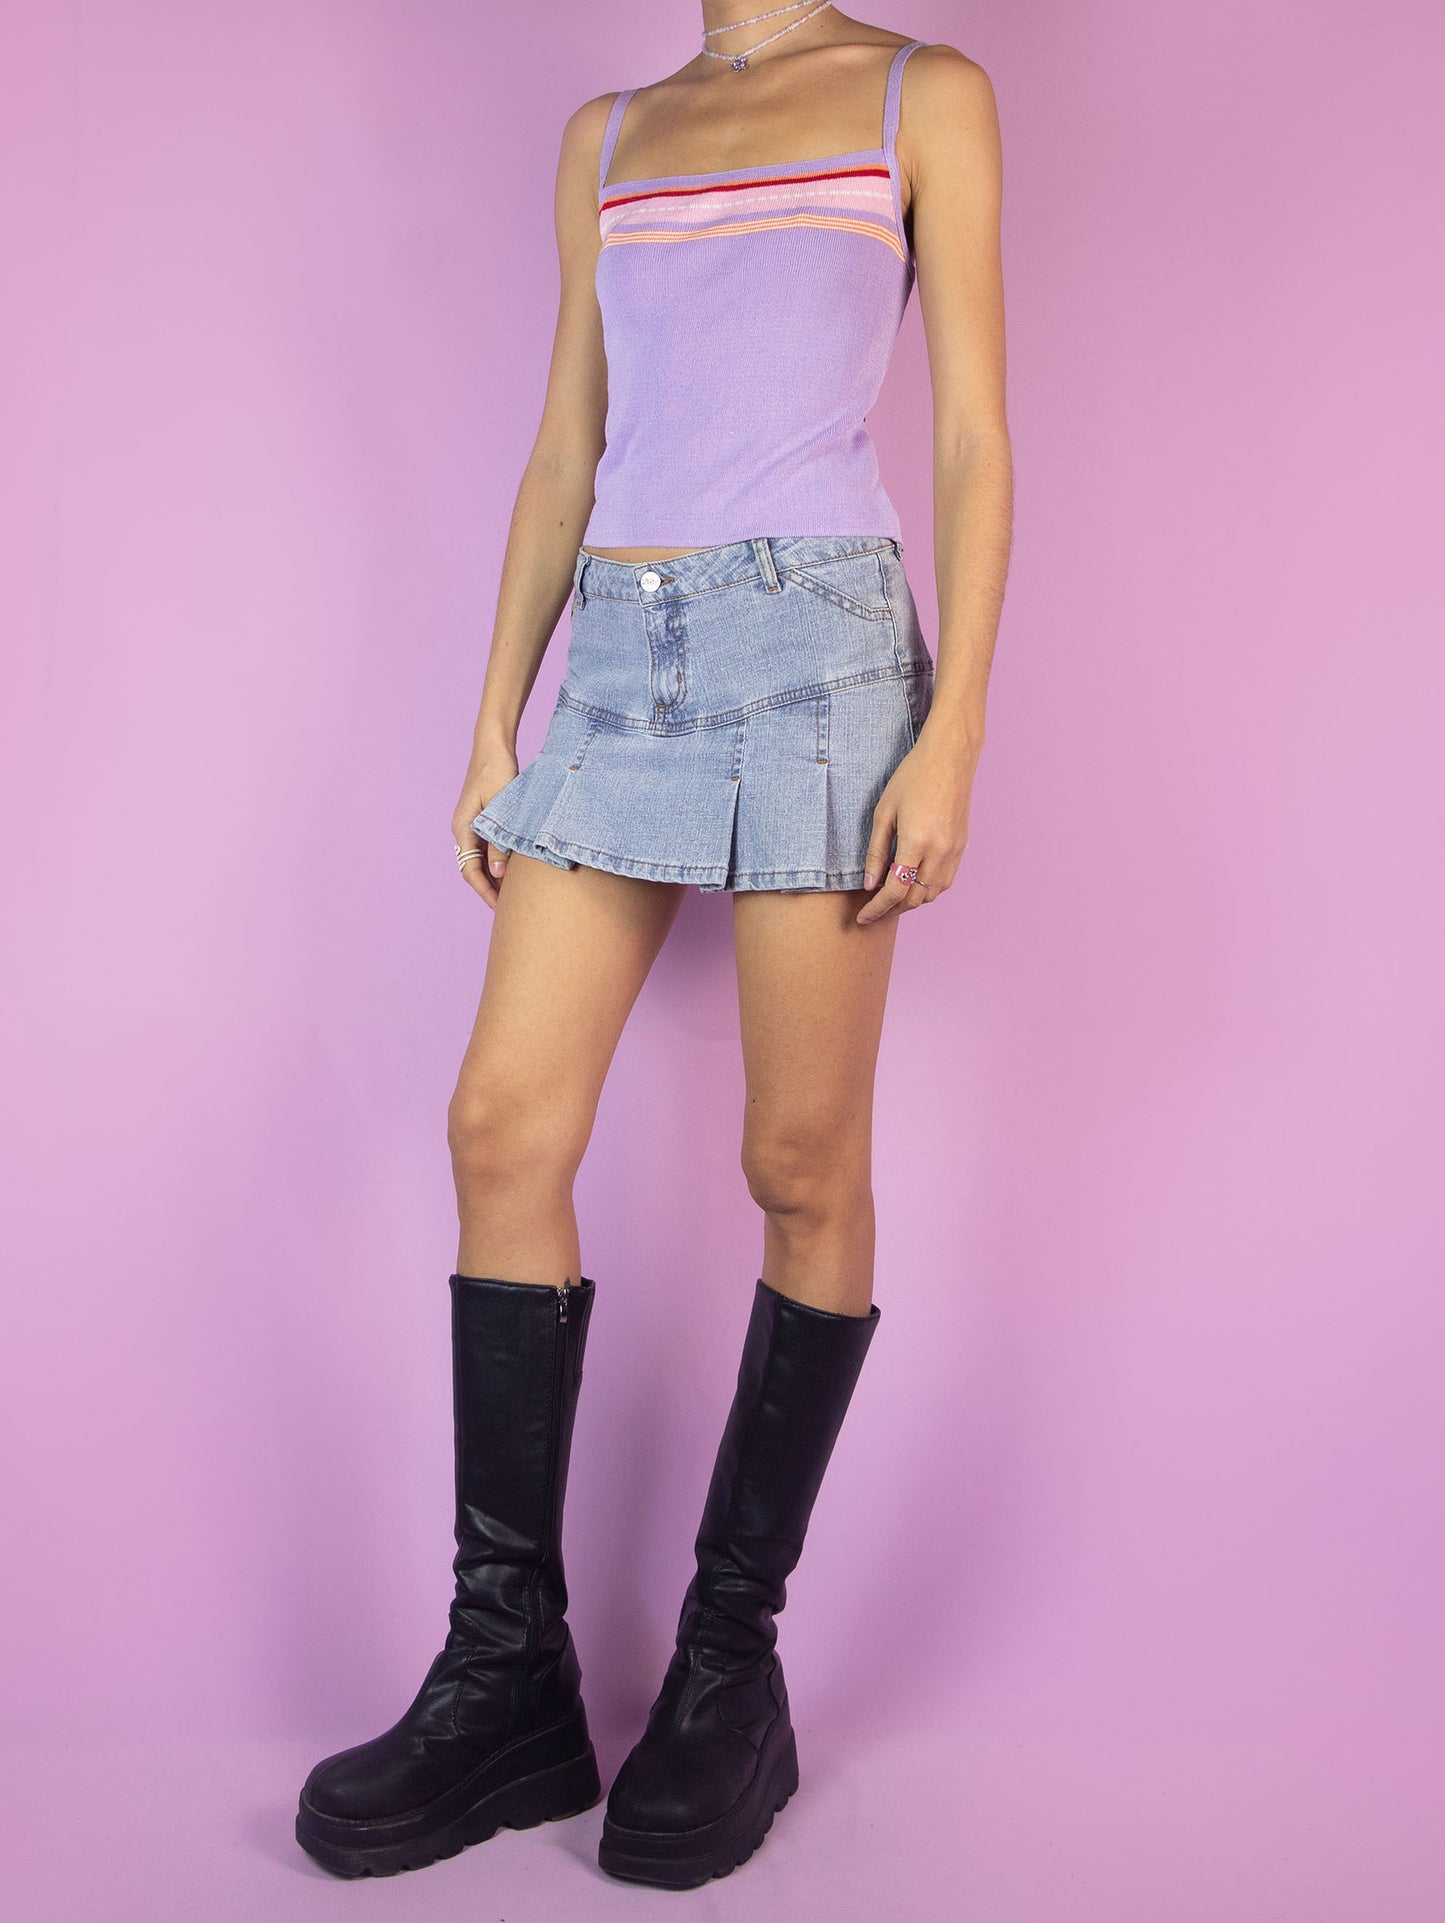 The Y2K Lilac Knit Crop Top is a vintage pastel purple striped cami top. Cyber fairy grunge 2000s tank top.